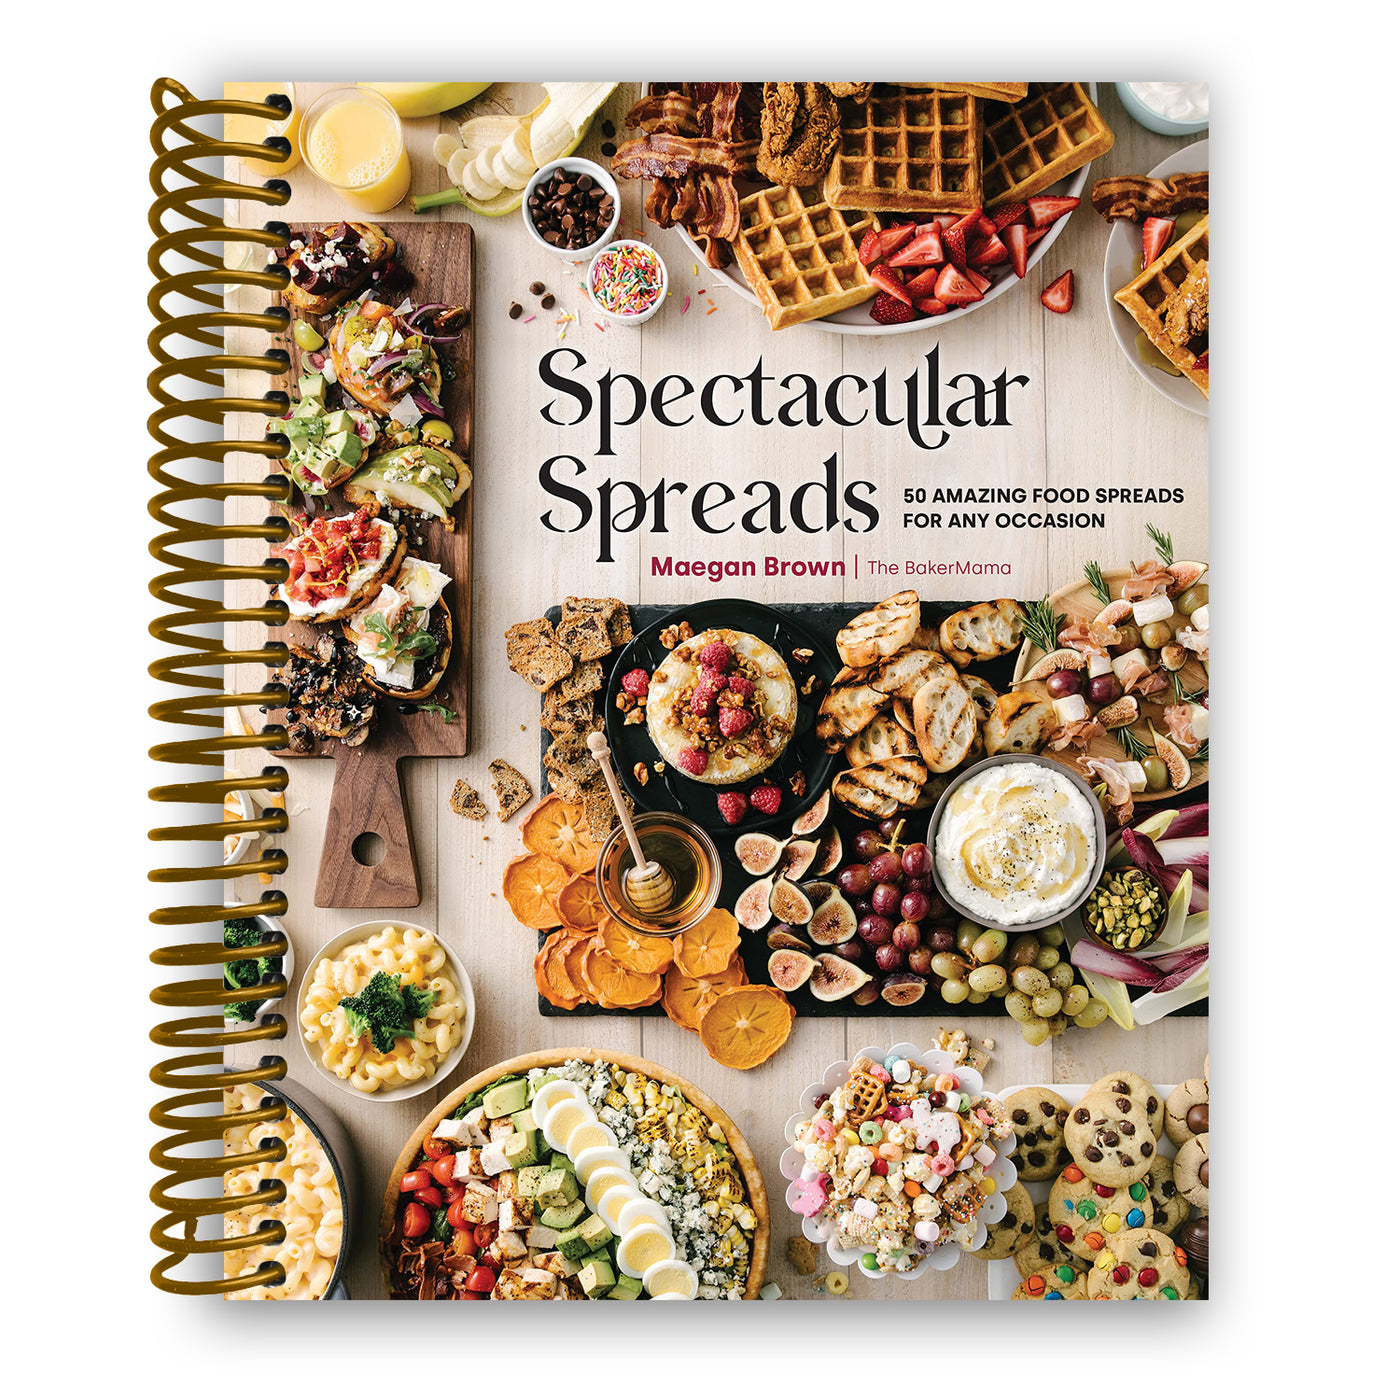 Spectacular Spreads: 50 Amazing Food Spreads for Any Occasion (Spiral-Bound)